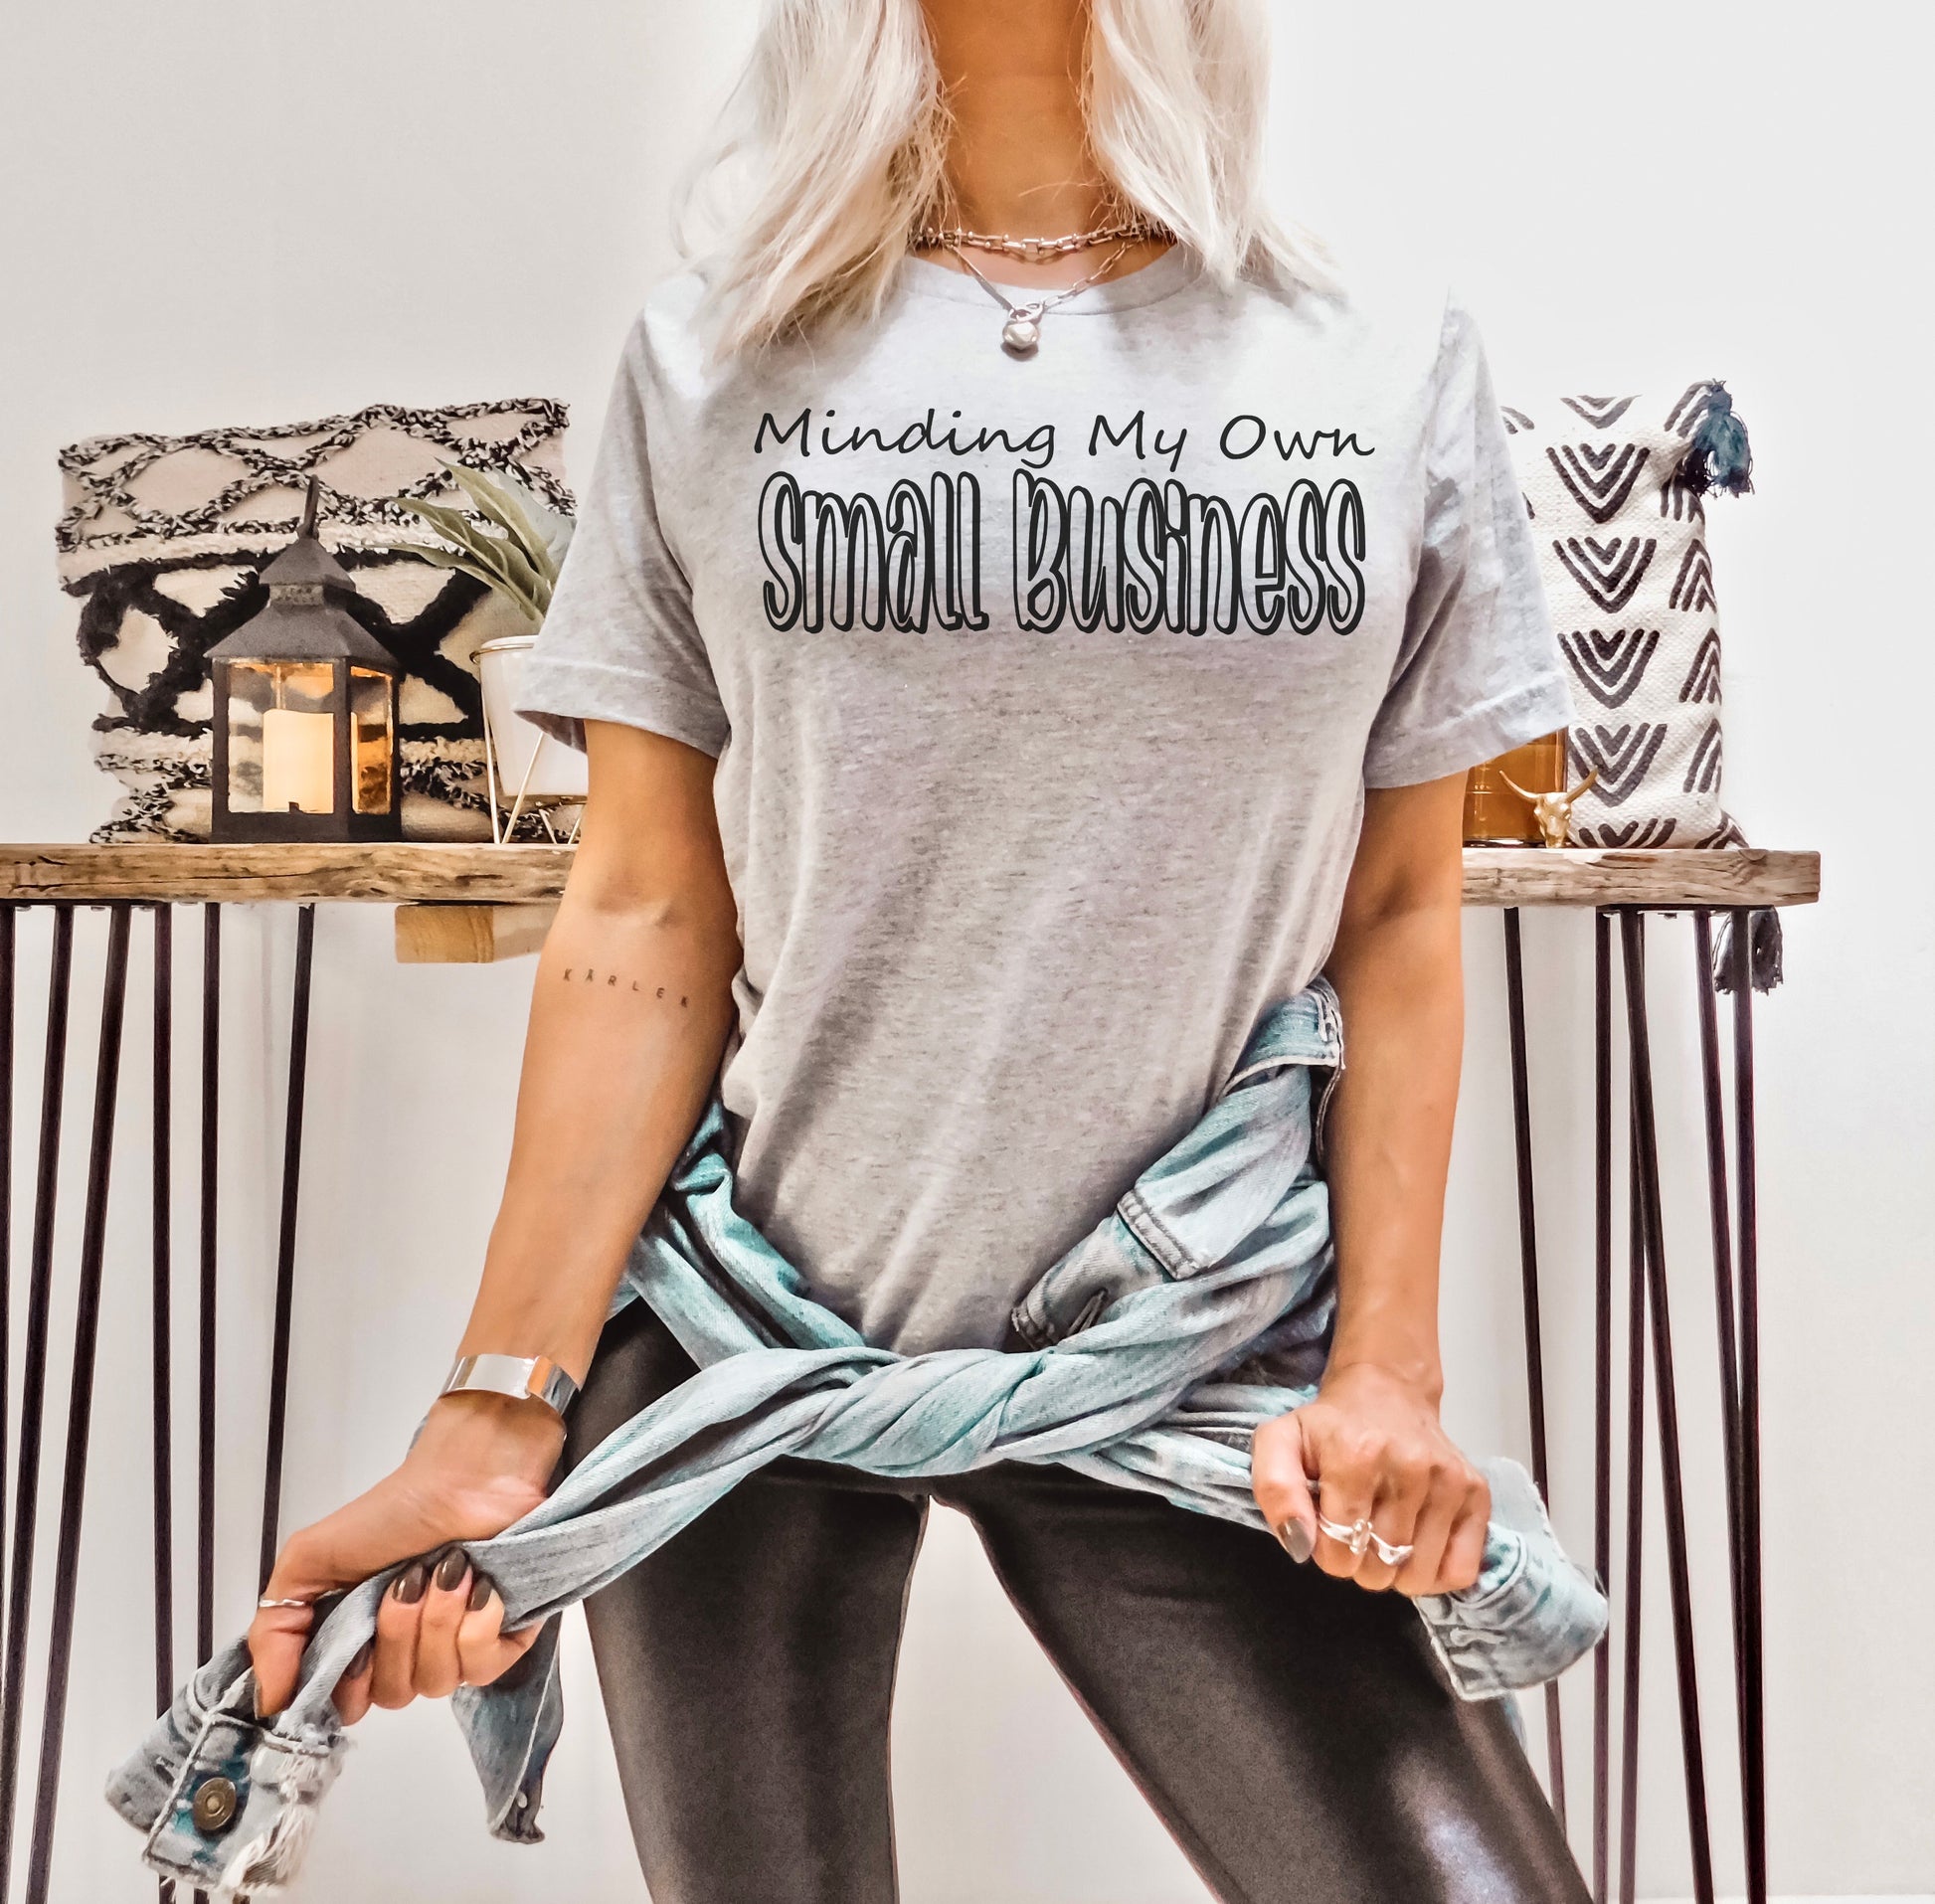 Designs by Prim Minding My Own Business Soft Unisex T-Shirt | Empire She-EO Hustle Entrepreneur Small Business Owner Self Made Graphic Screen Print Top